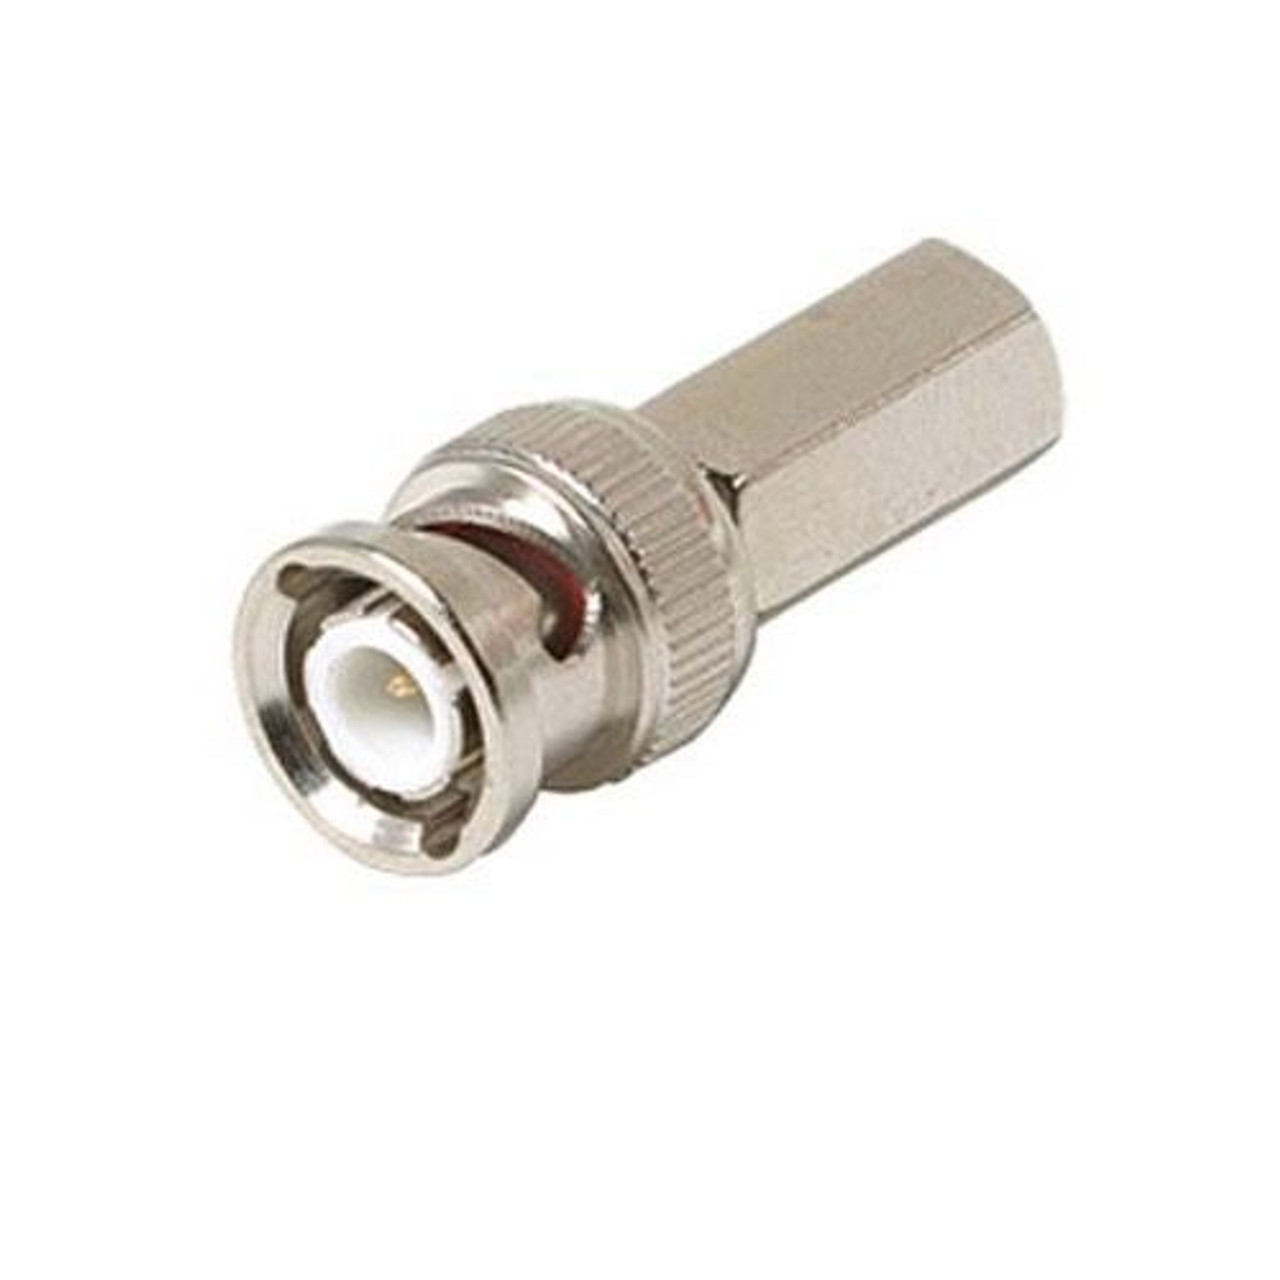 Steren 200-122 BNC to RG6 Twist-On Coaxial Cable Connector RG-6 Adapter Connector Audio Video Data Signal Component Device Communication, Part # 200122